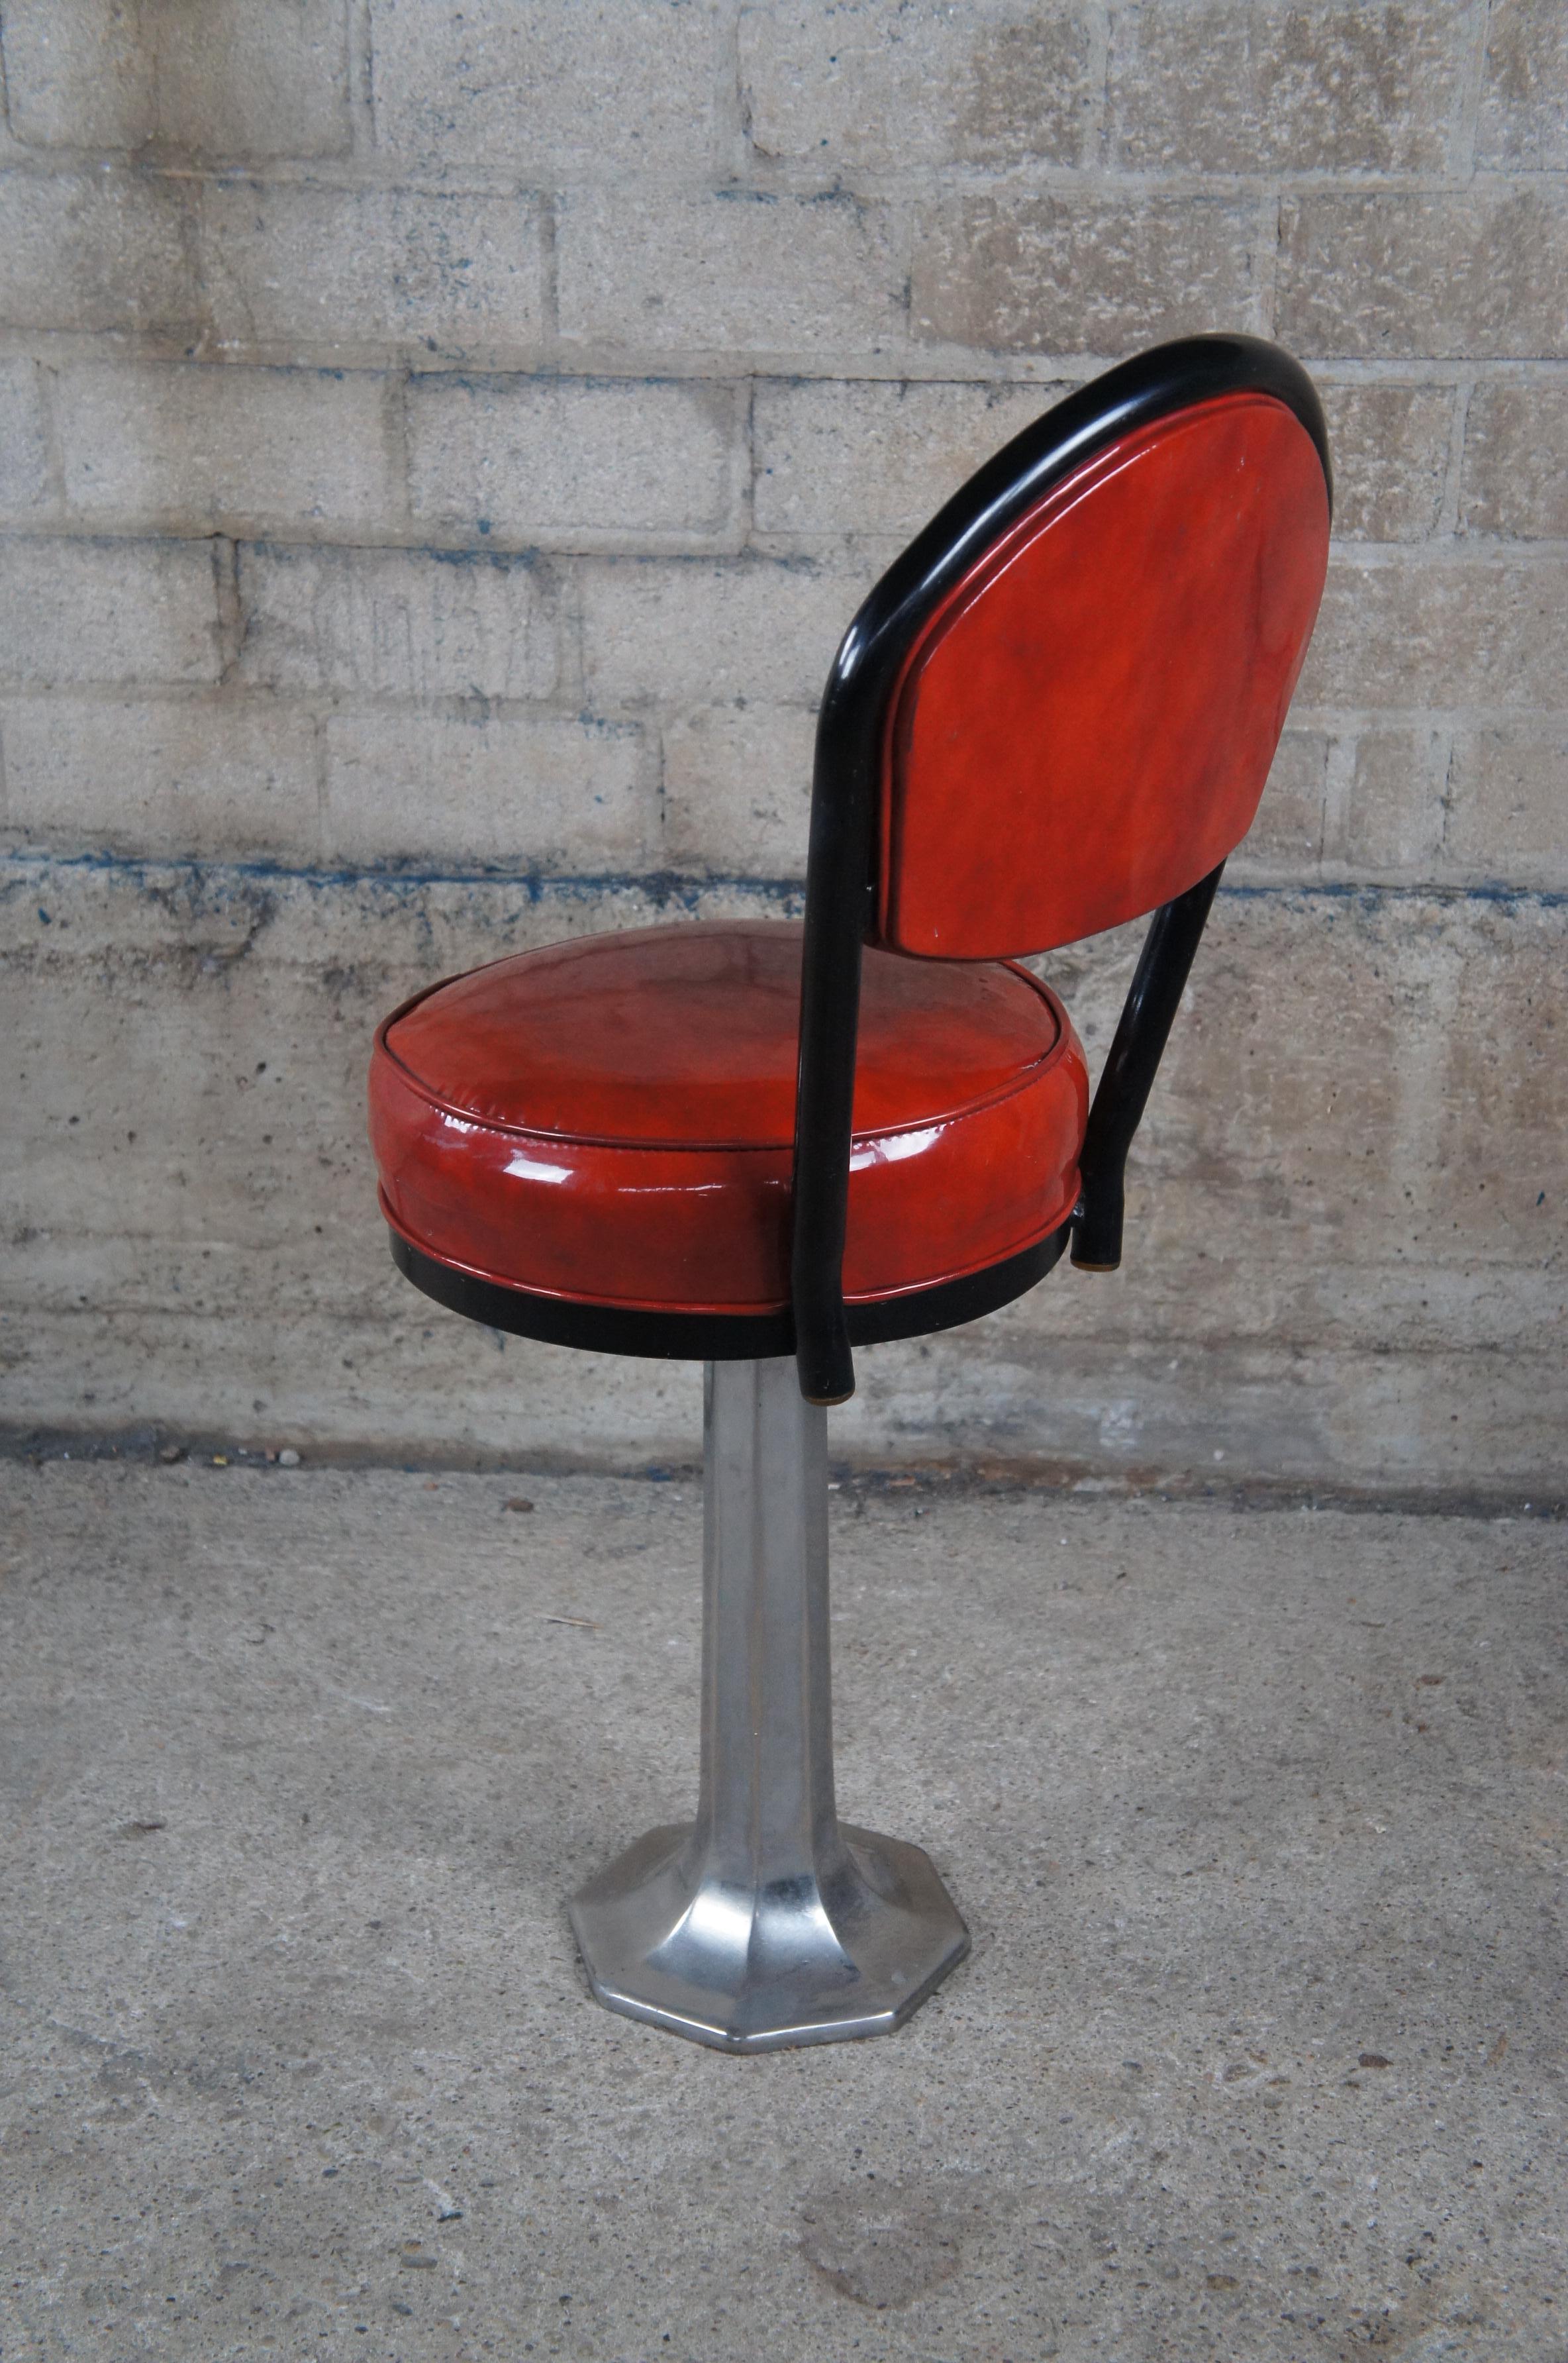 4 Mid Century Chromodern No. 13 Soda Fountain Ice Cream Bar Diner Swivel Stools In Good Condition For Sale In Dayton, OH